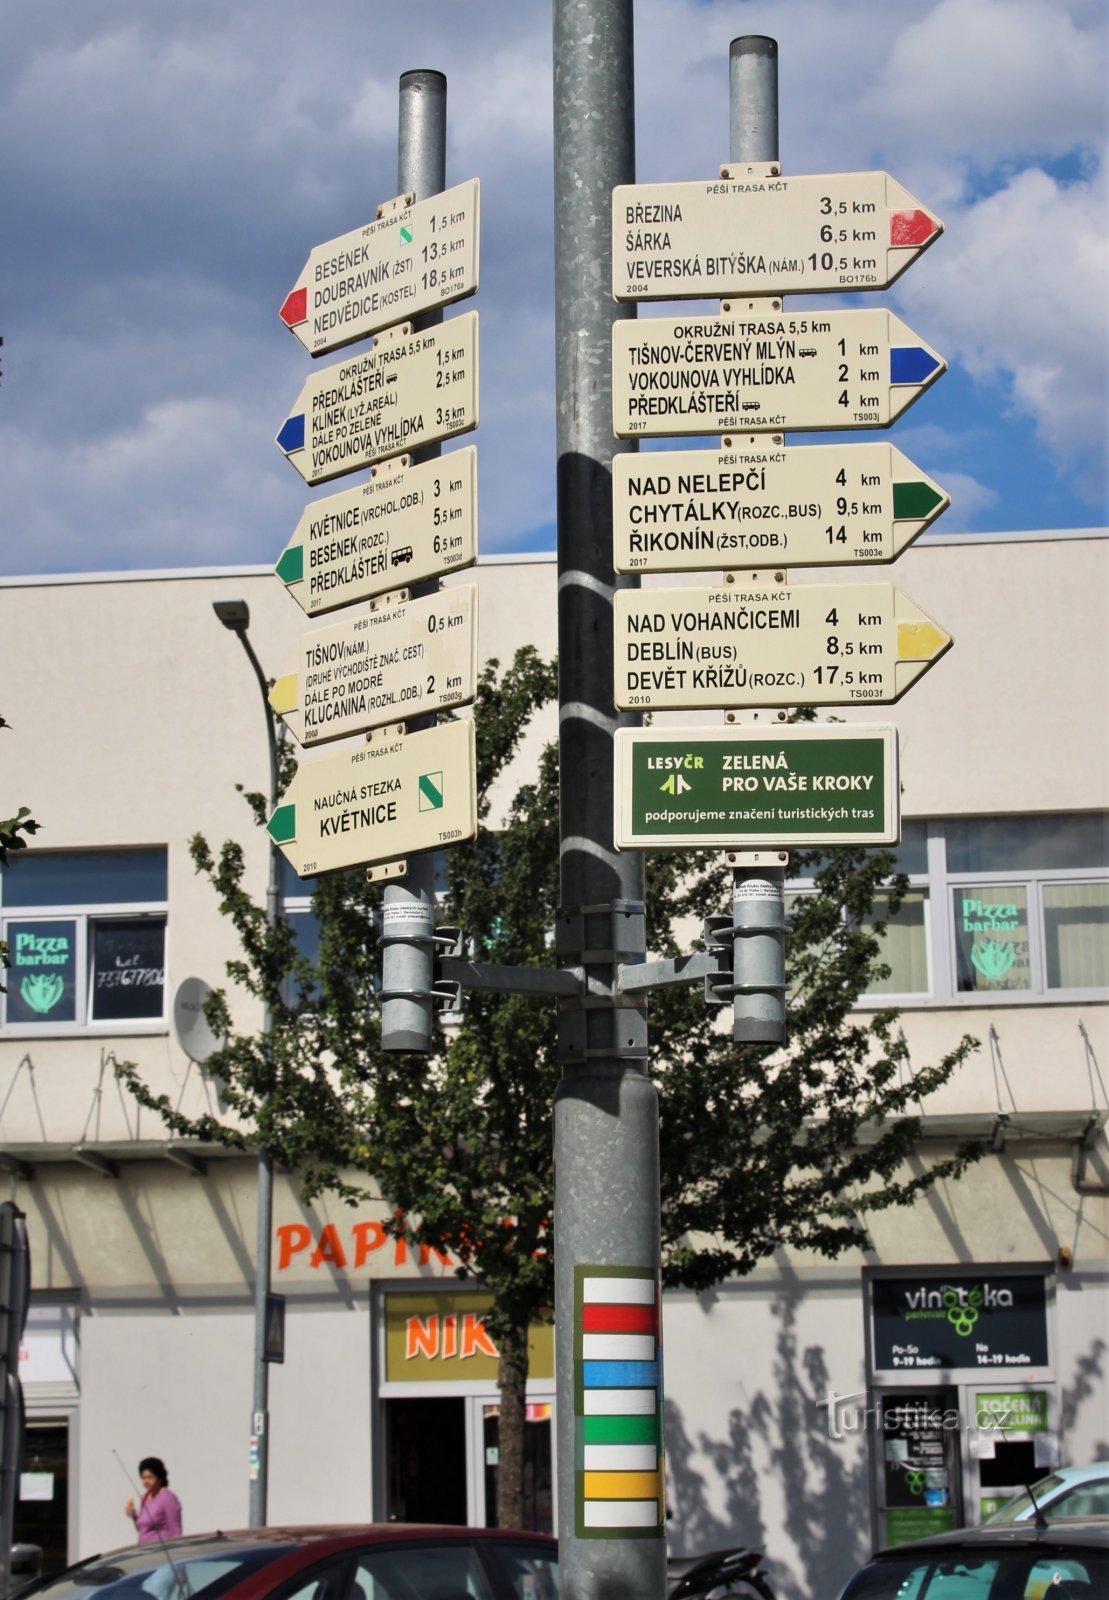 In front of the station building there is a double-sided tourist guide in all four colors